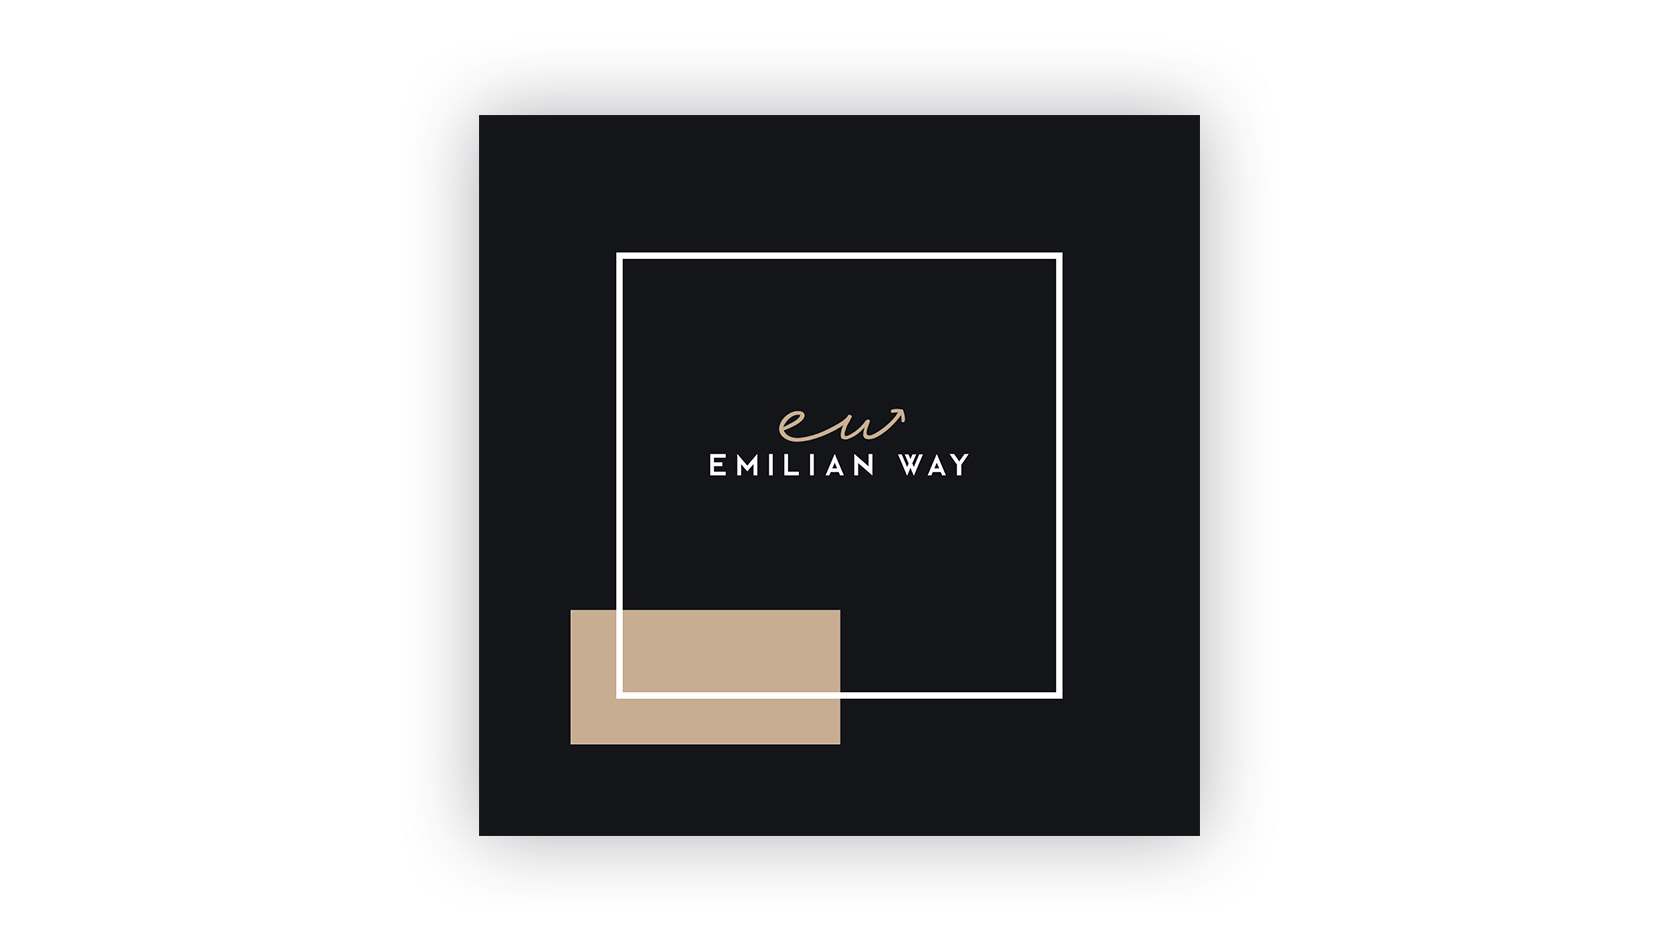 Graphic designer Project of EmilianWay